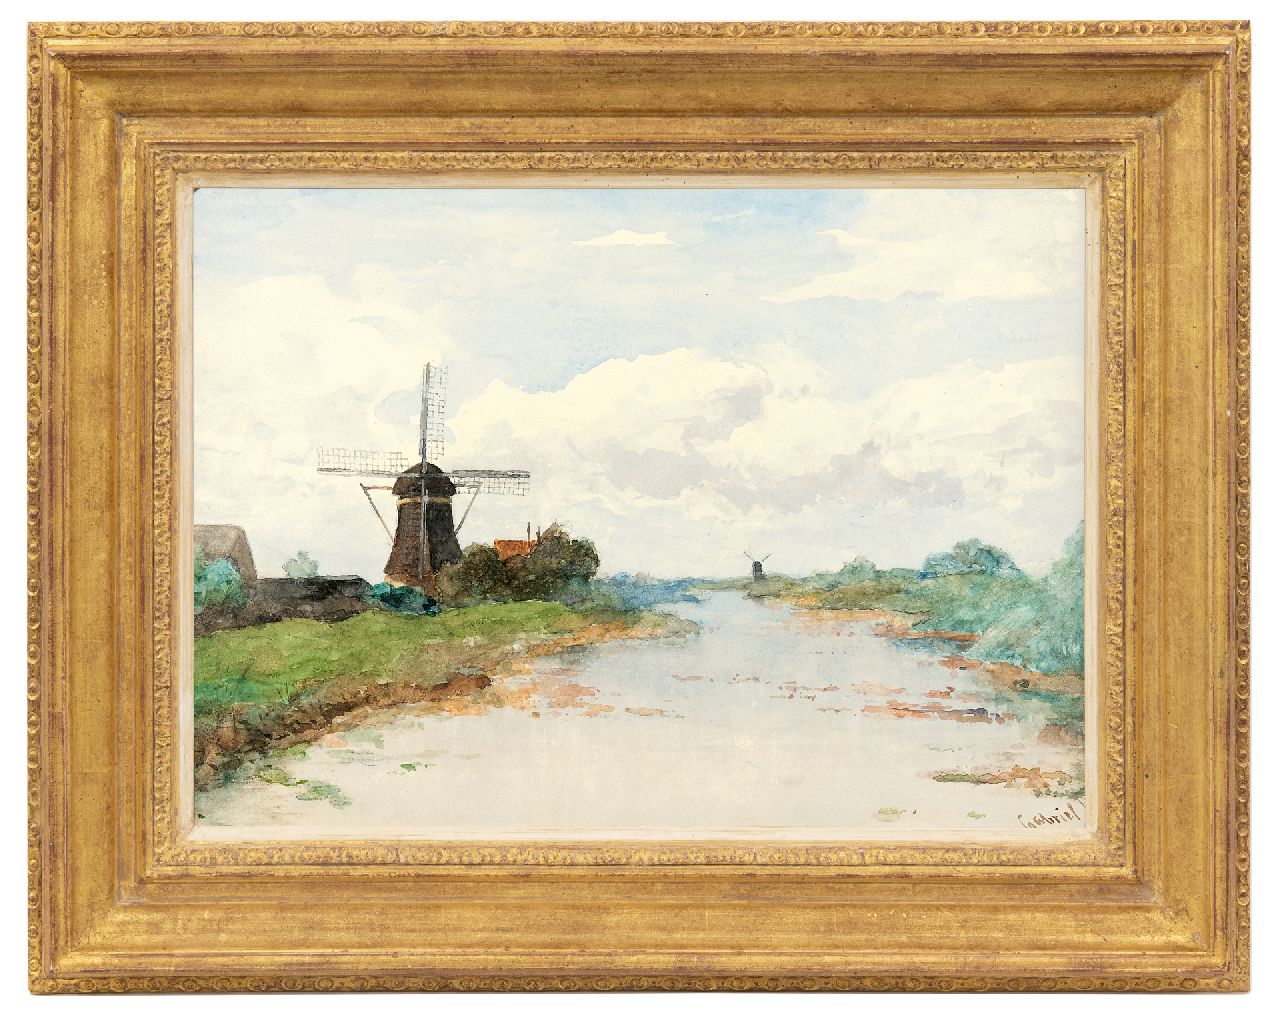 Gabriel P.J.C.  | Paul Joseph Constantin 'Constan(t)' Gabriel | Watercolours and drawings offered for sale | View on the Proosdijer windmill on the river Winkel, watercolour on paper 36.1 x 53.3 cm, signed l.r.